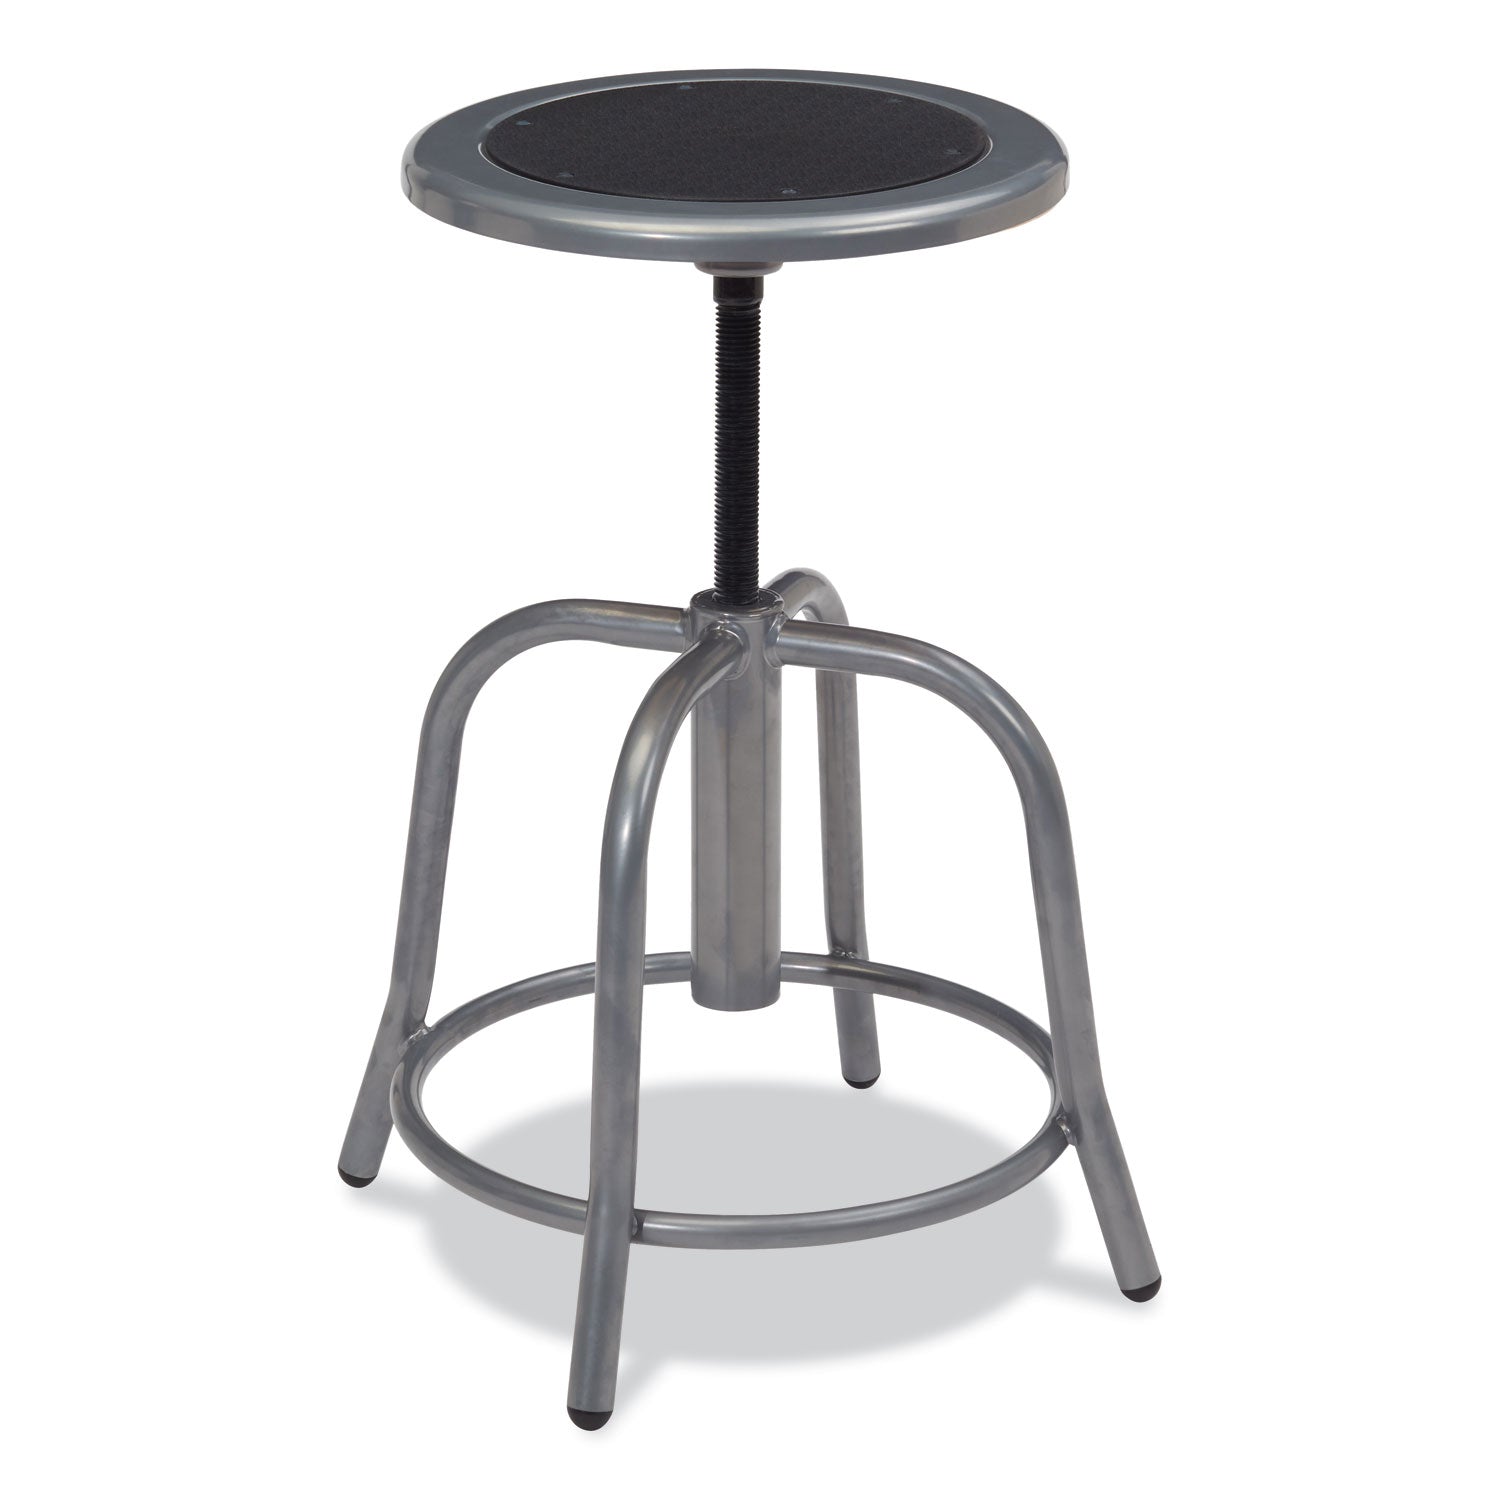 6800-series-height-adj-metal-seat-swivel-stool-supports-300-lb-18-24-seat-ht-black-seat-gray-baseships-in-1-3-bus-days_nps681002 - 2